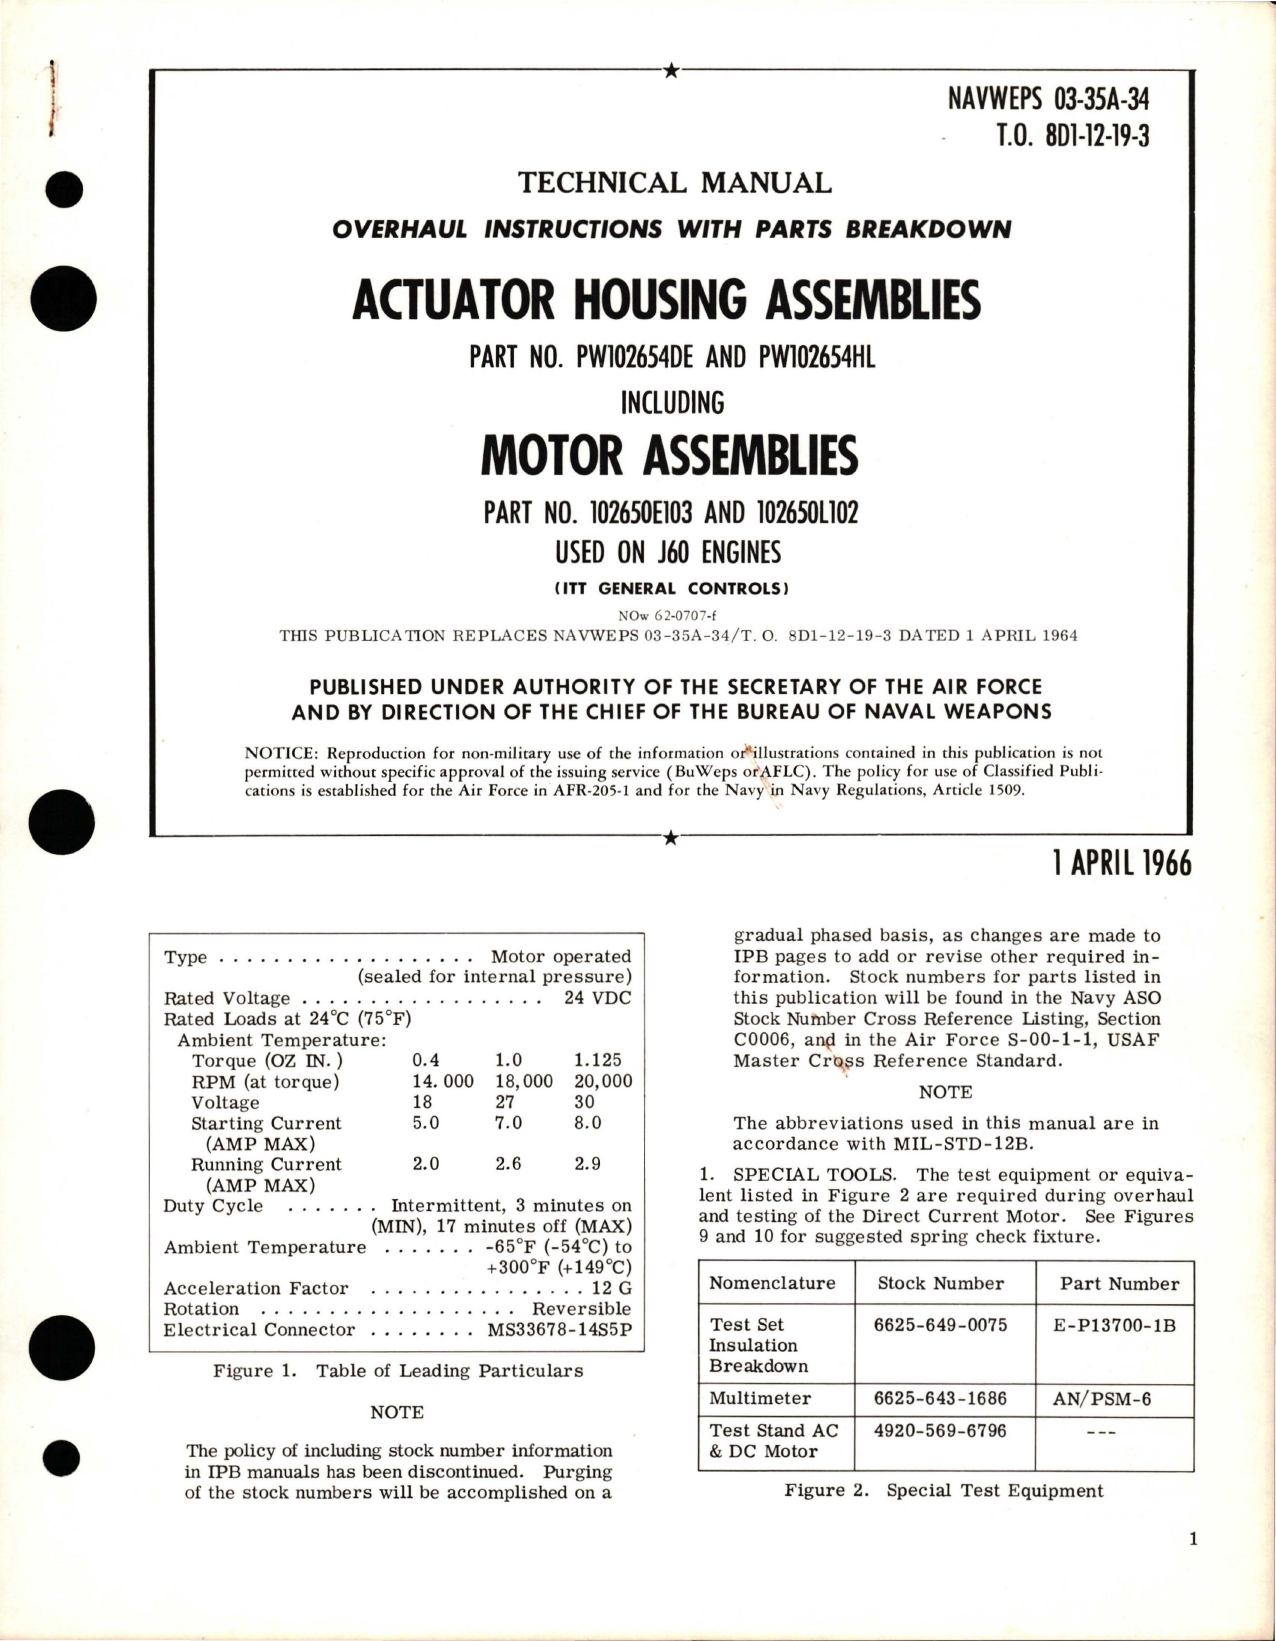 Sample page 1 from AirCorps Library document: Overhaul Instructions with Parts Breakdown for Actuator Housing & Motor Assemblies - Parts PW102654DE, PW102654HL, 102650E103, and 102650L10